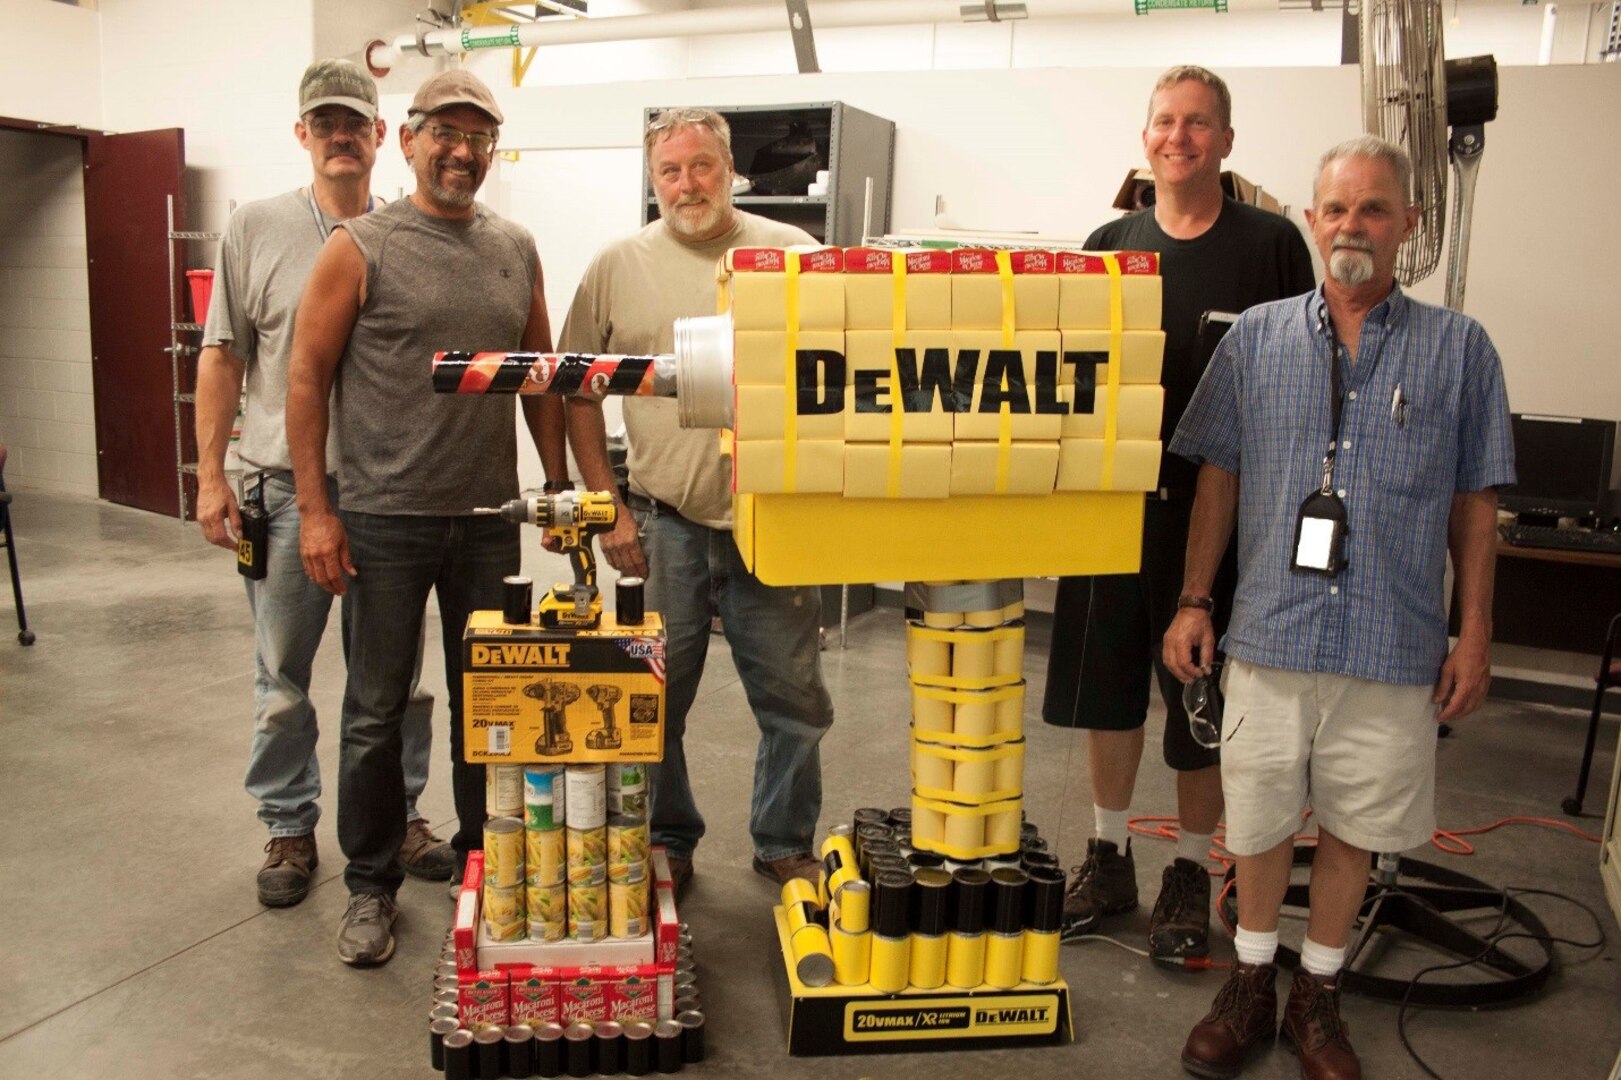 Members of the Maintenance Shop team pose with their working DeWalt drill.  The drill won first place in DLA Installation Support at Susquehanna’s “CANstruction” challenge, benefitting the Central Pennsylvania Food Bank through the 2016 Feds Feed Families Food campaign.  